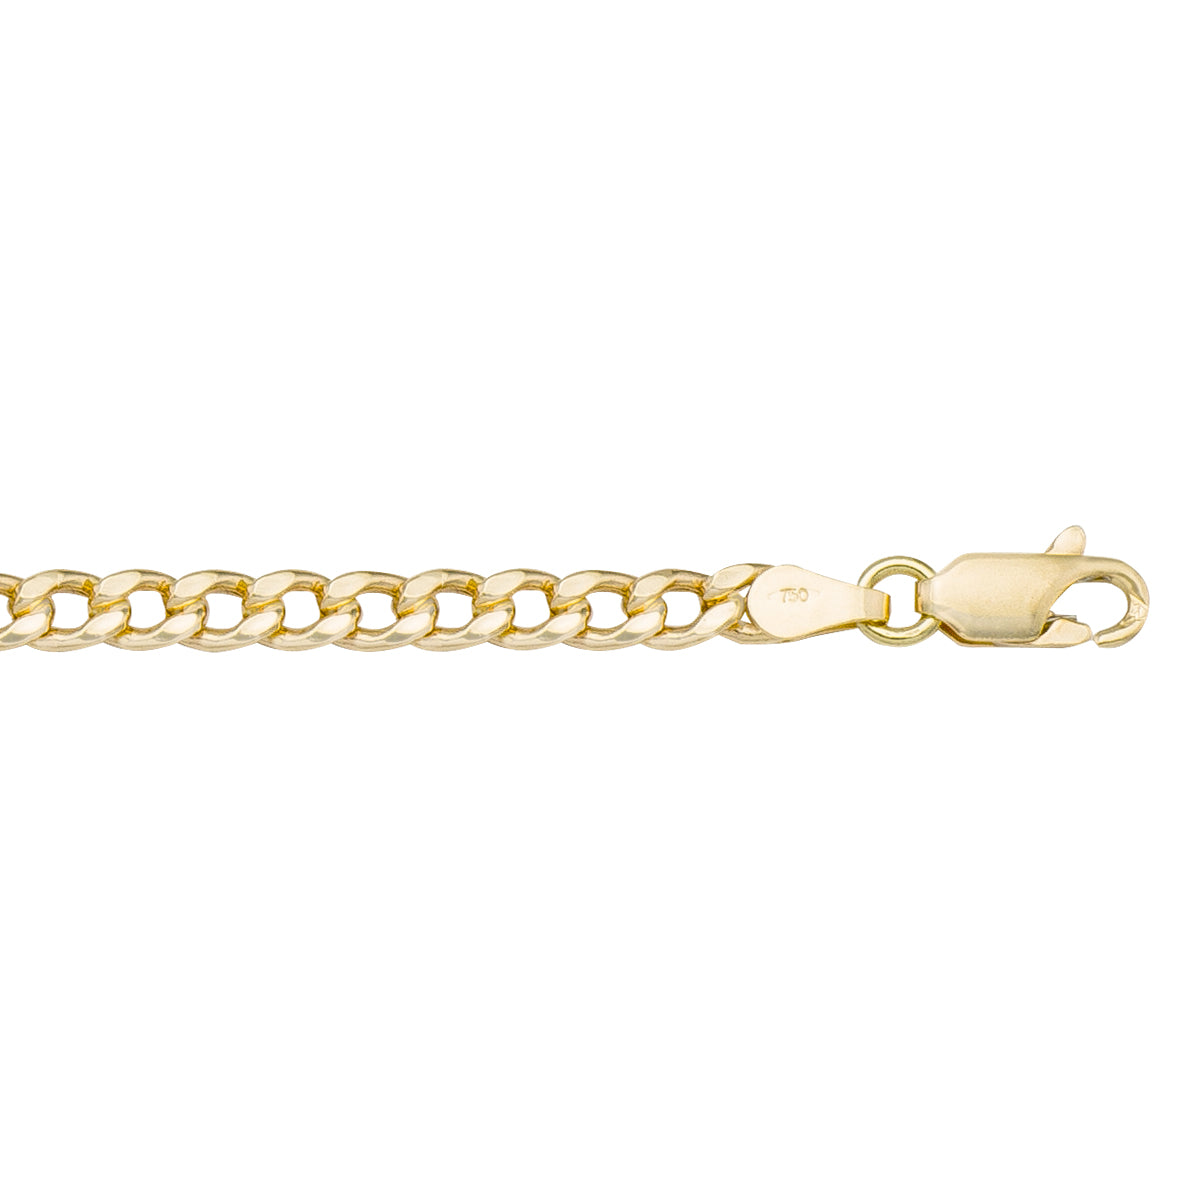 BRACELETS YELLOW GOLD HOLLOW CURB LINK CHAIN